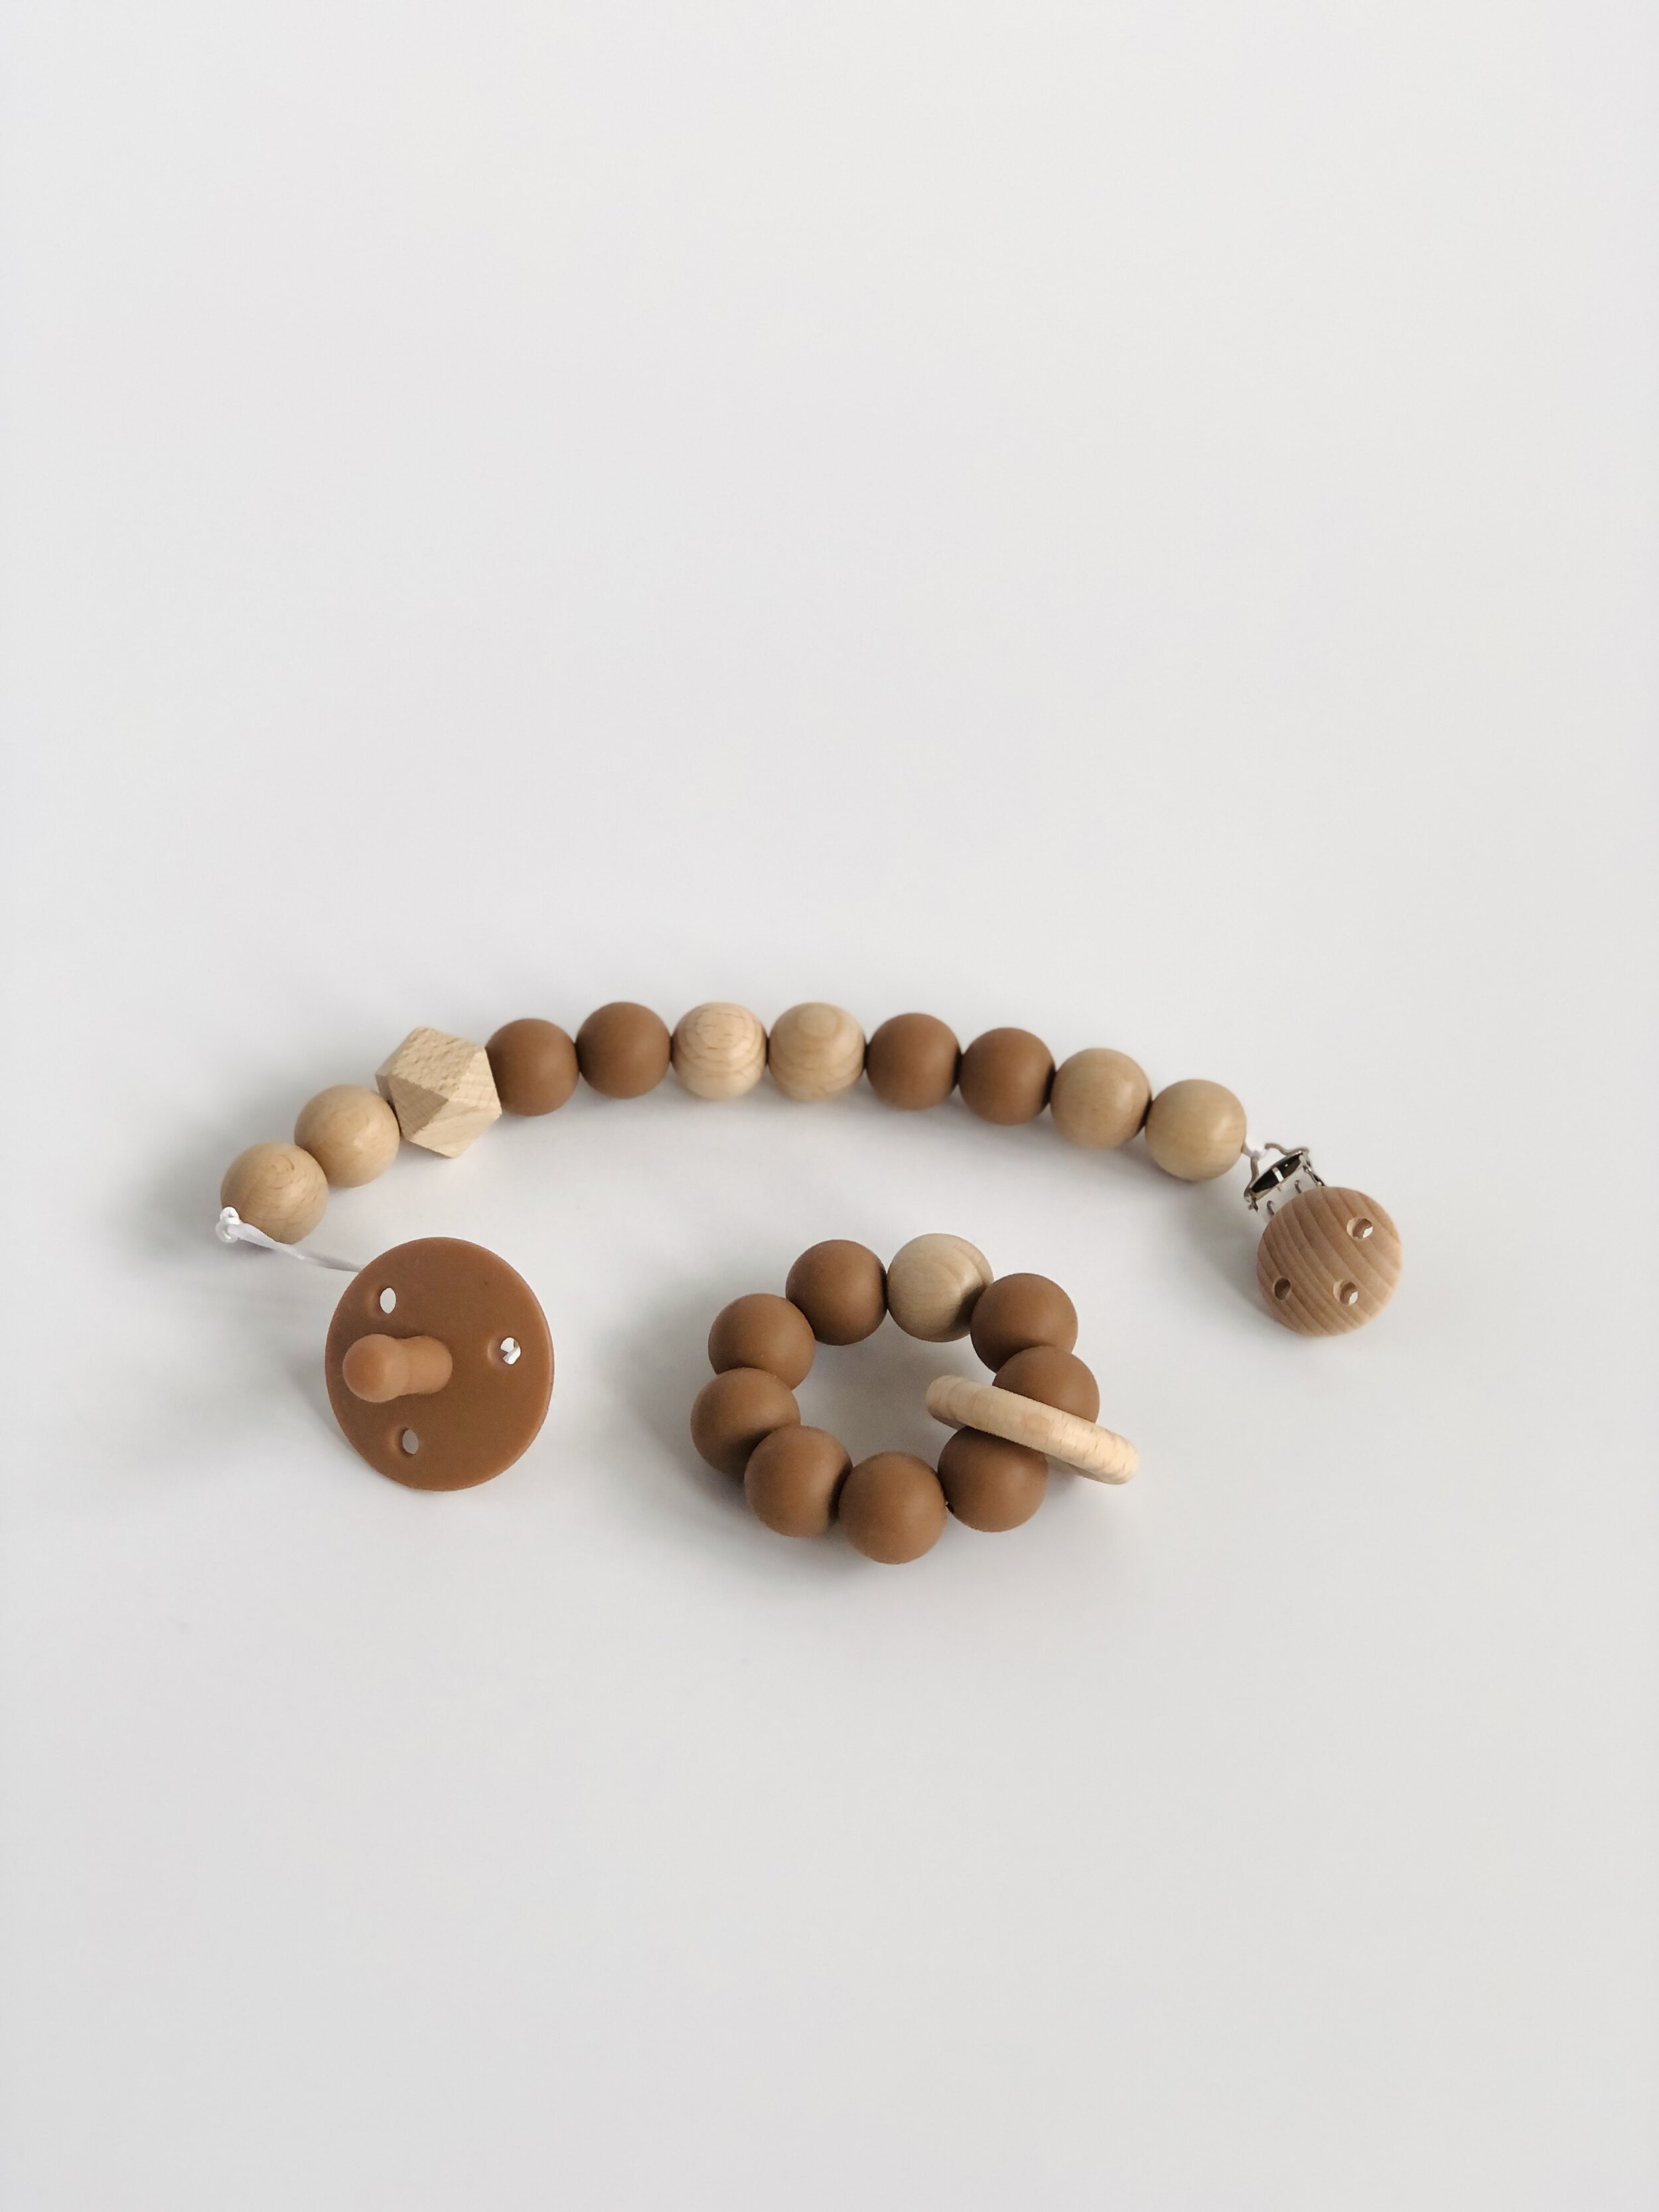 5pcs Amyster 5pcs Pacifier Clip Wooden Organic and Silicone Beads Rattle Holder Chewable Baby Accessories Pendant